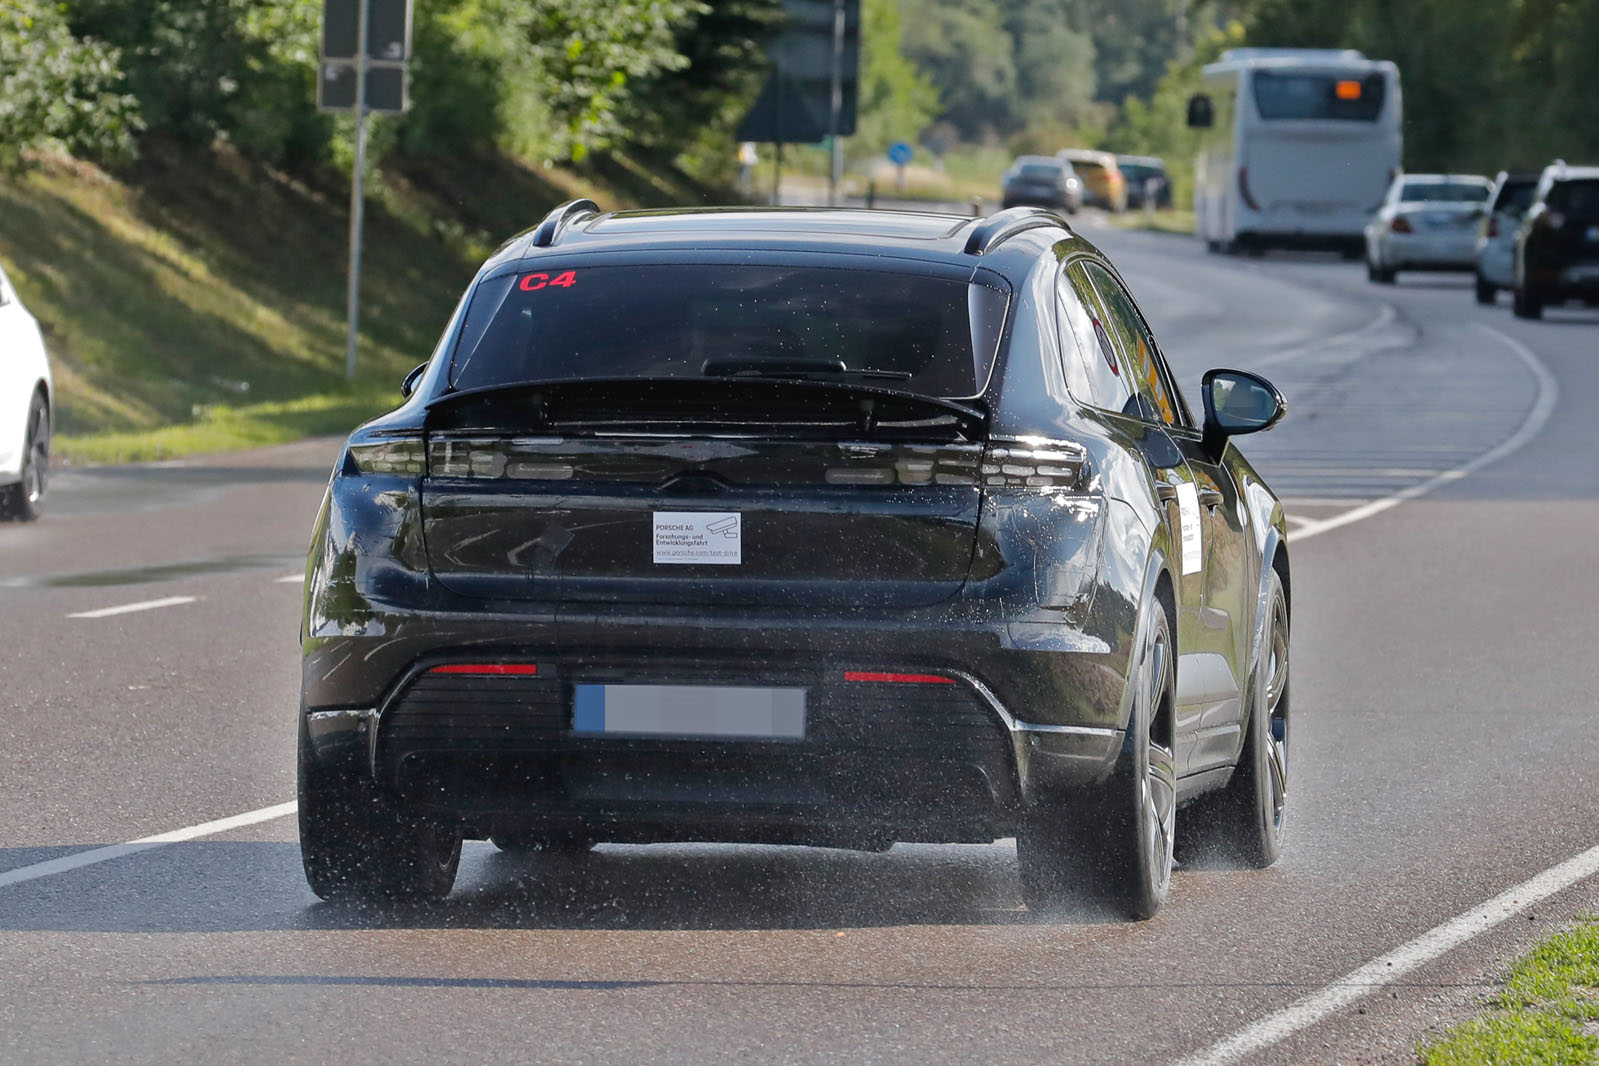 First drive review: 2022 Porsche Macan and Macan S emphasize the drive